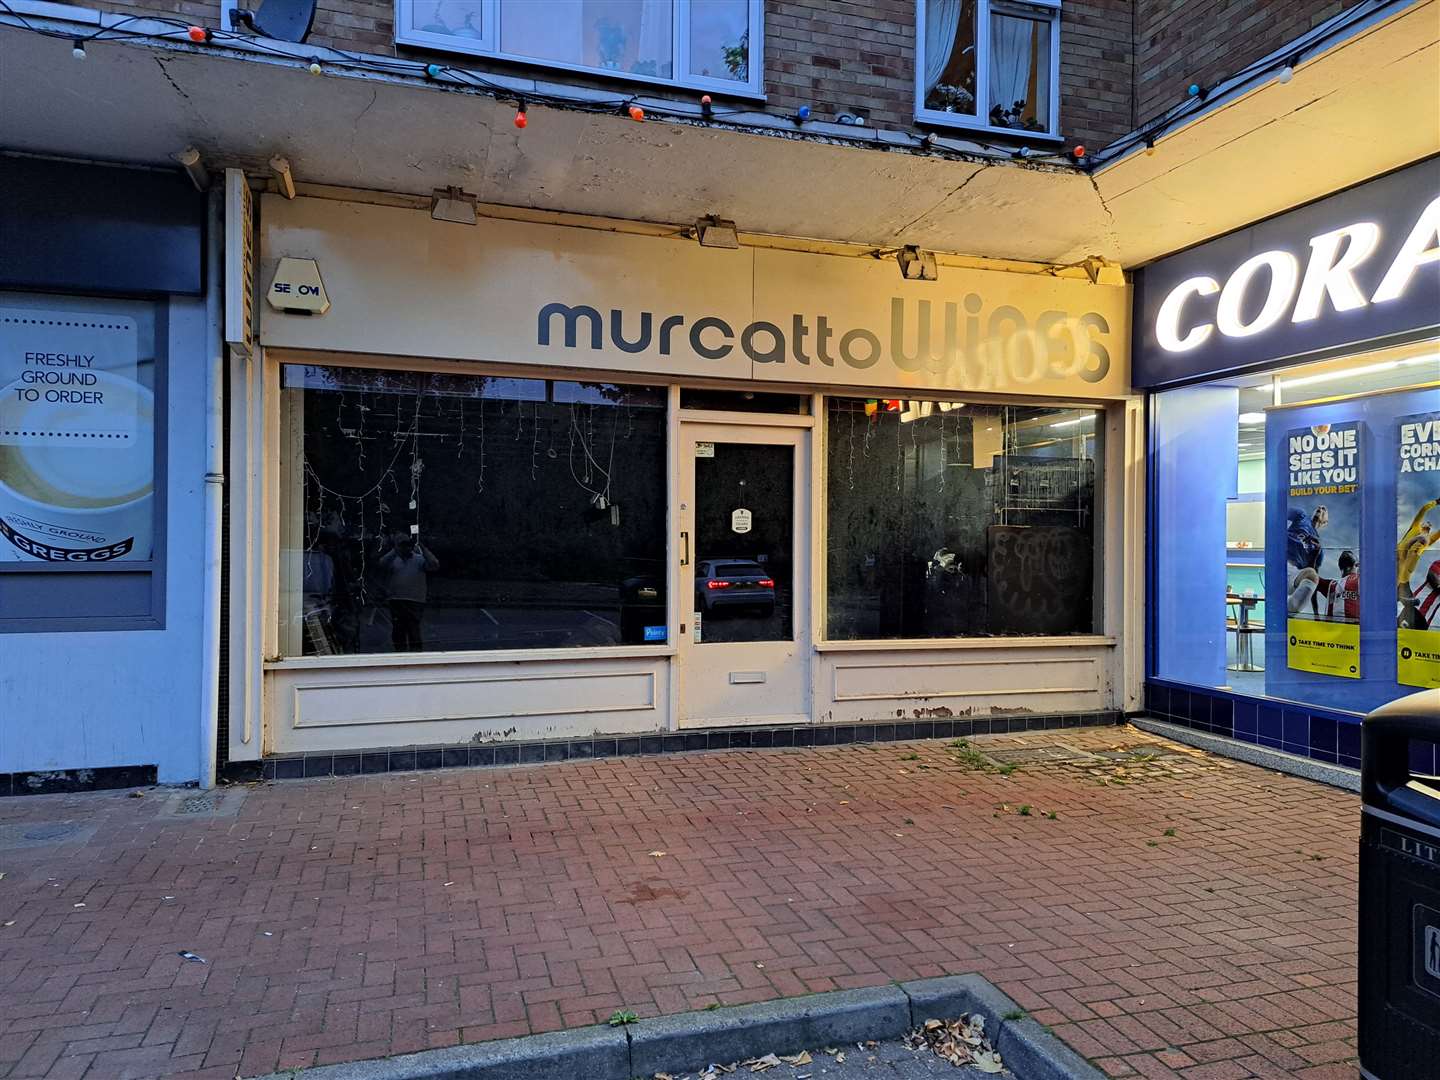 The new outlet will replace Murcatto Wines